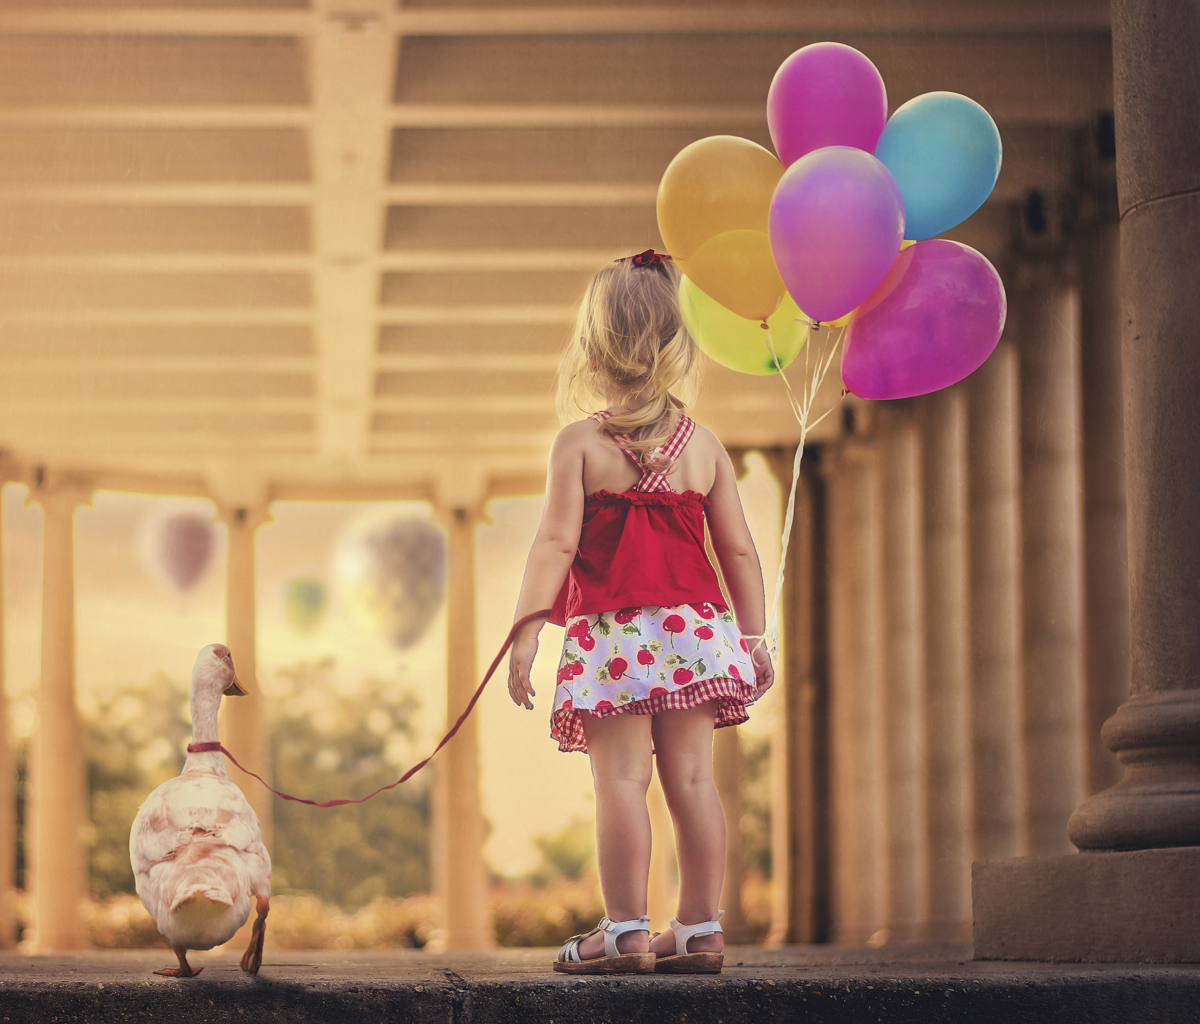 Das Little Girl With Colorful Balloons Wallpaper 1200x1024